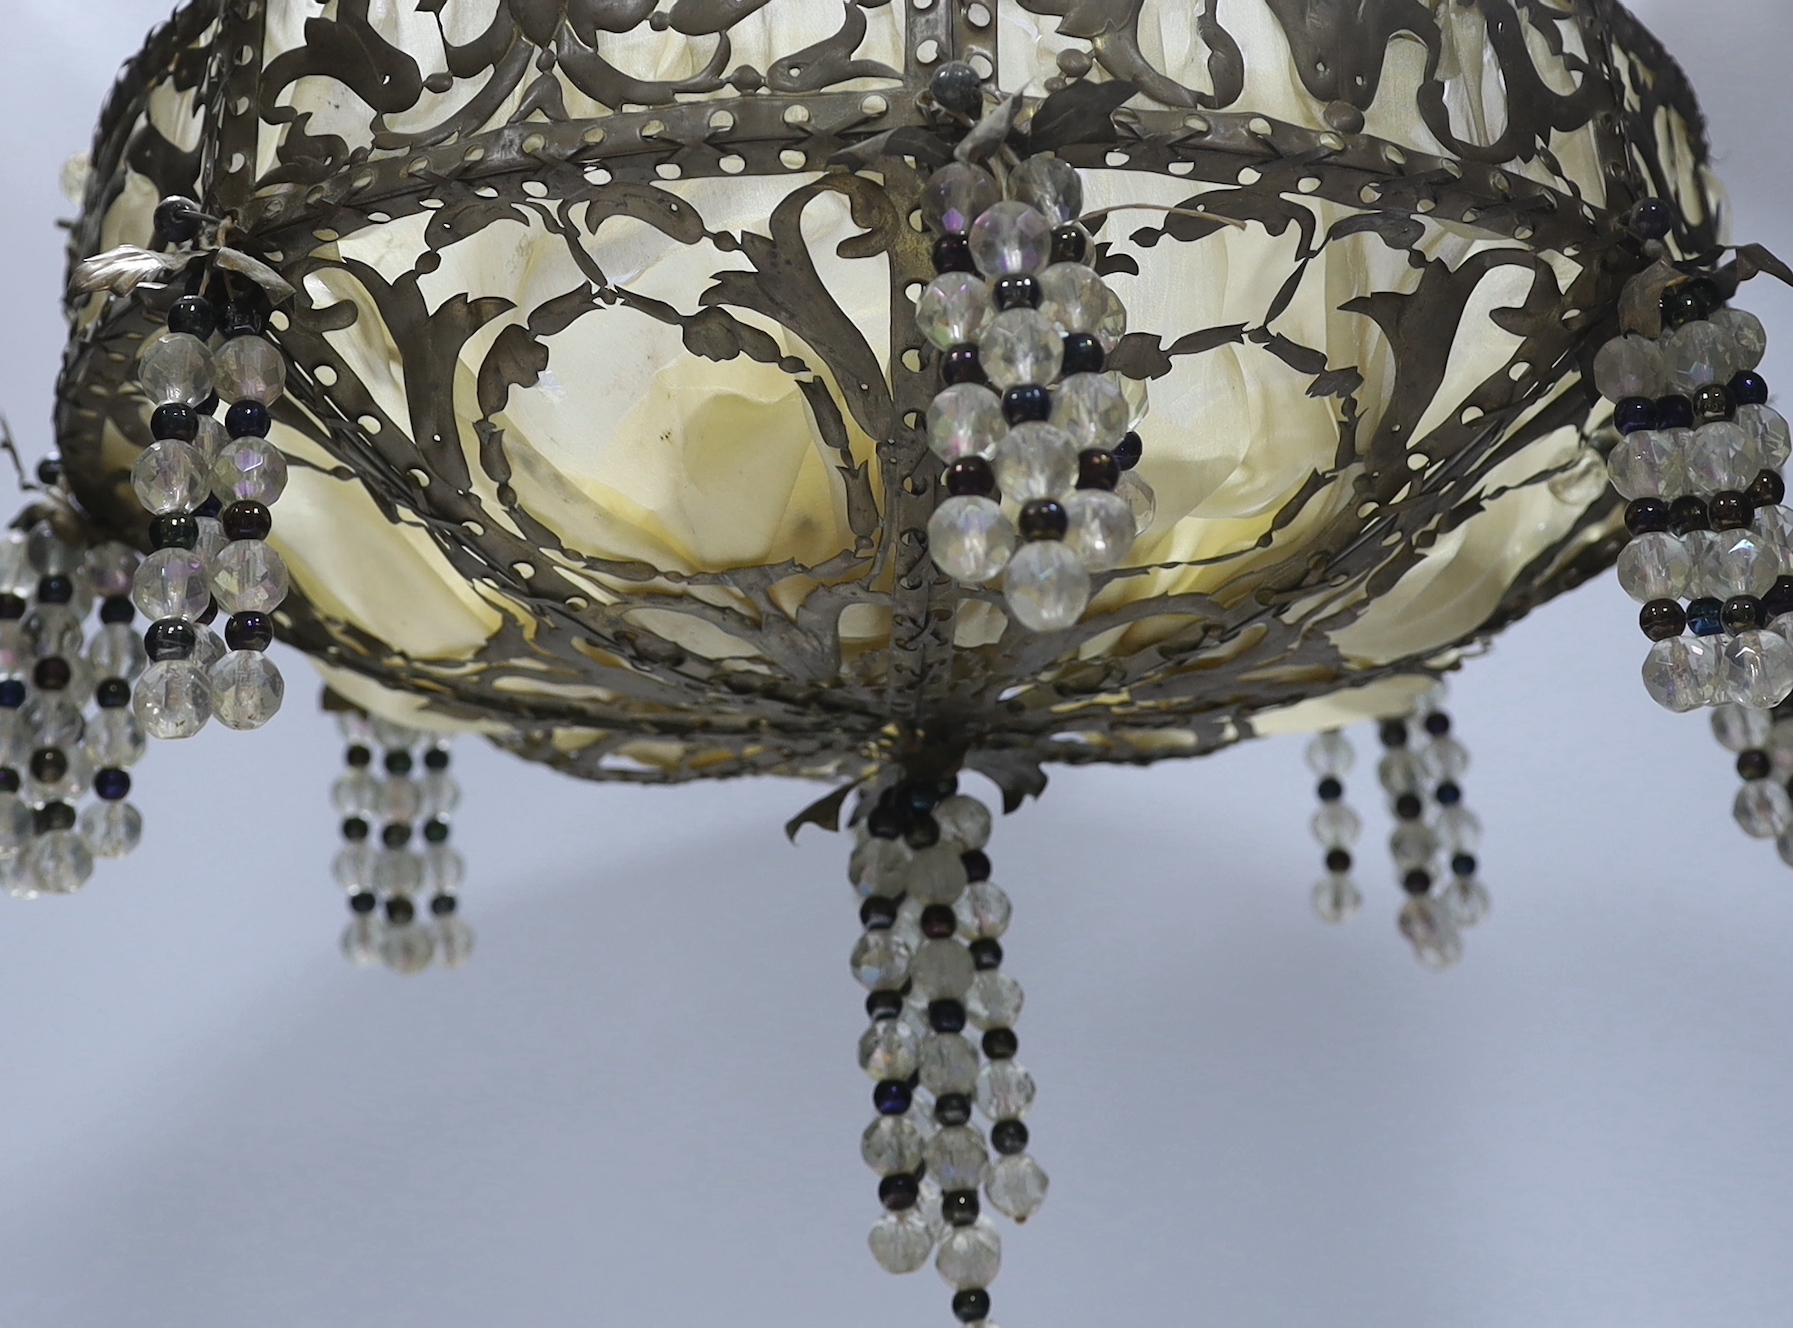 Two lustre drop hanging light shades, largest 40cm in diameter - Image 3 of 3